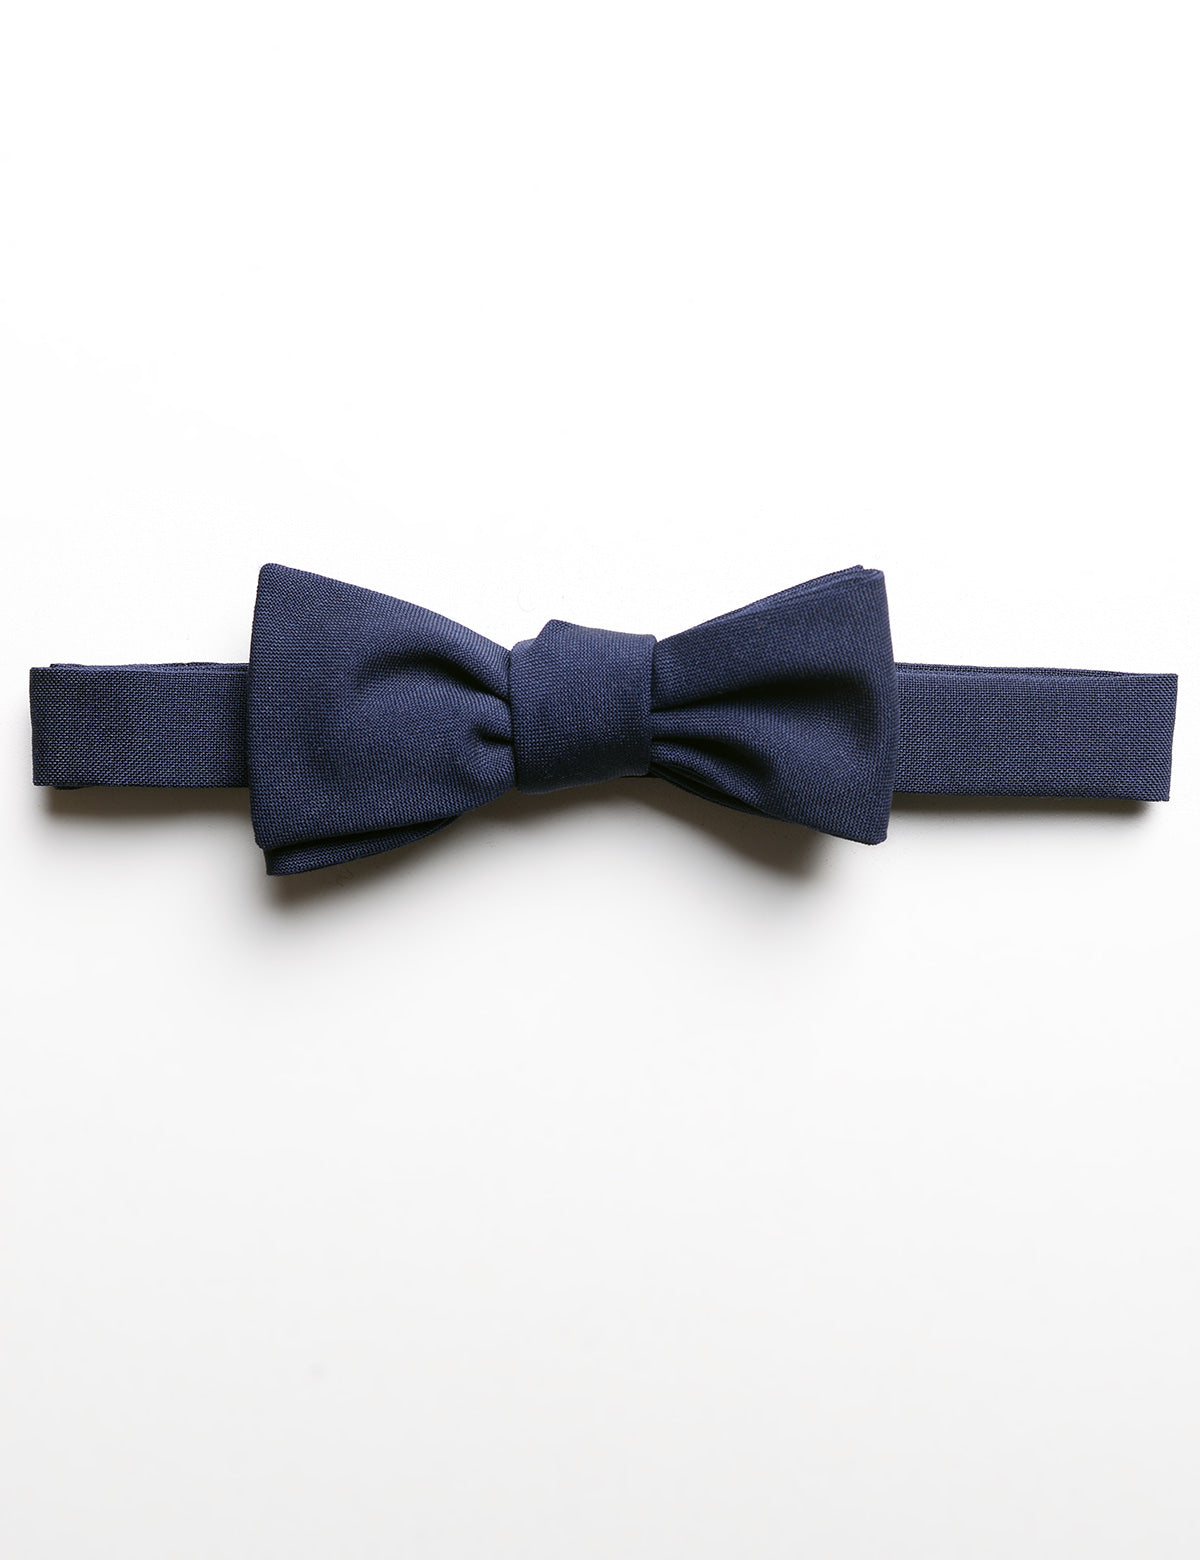 Tied photo of Brooklyn Tailors Formal Bowtie in Navy Wool & Mohair